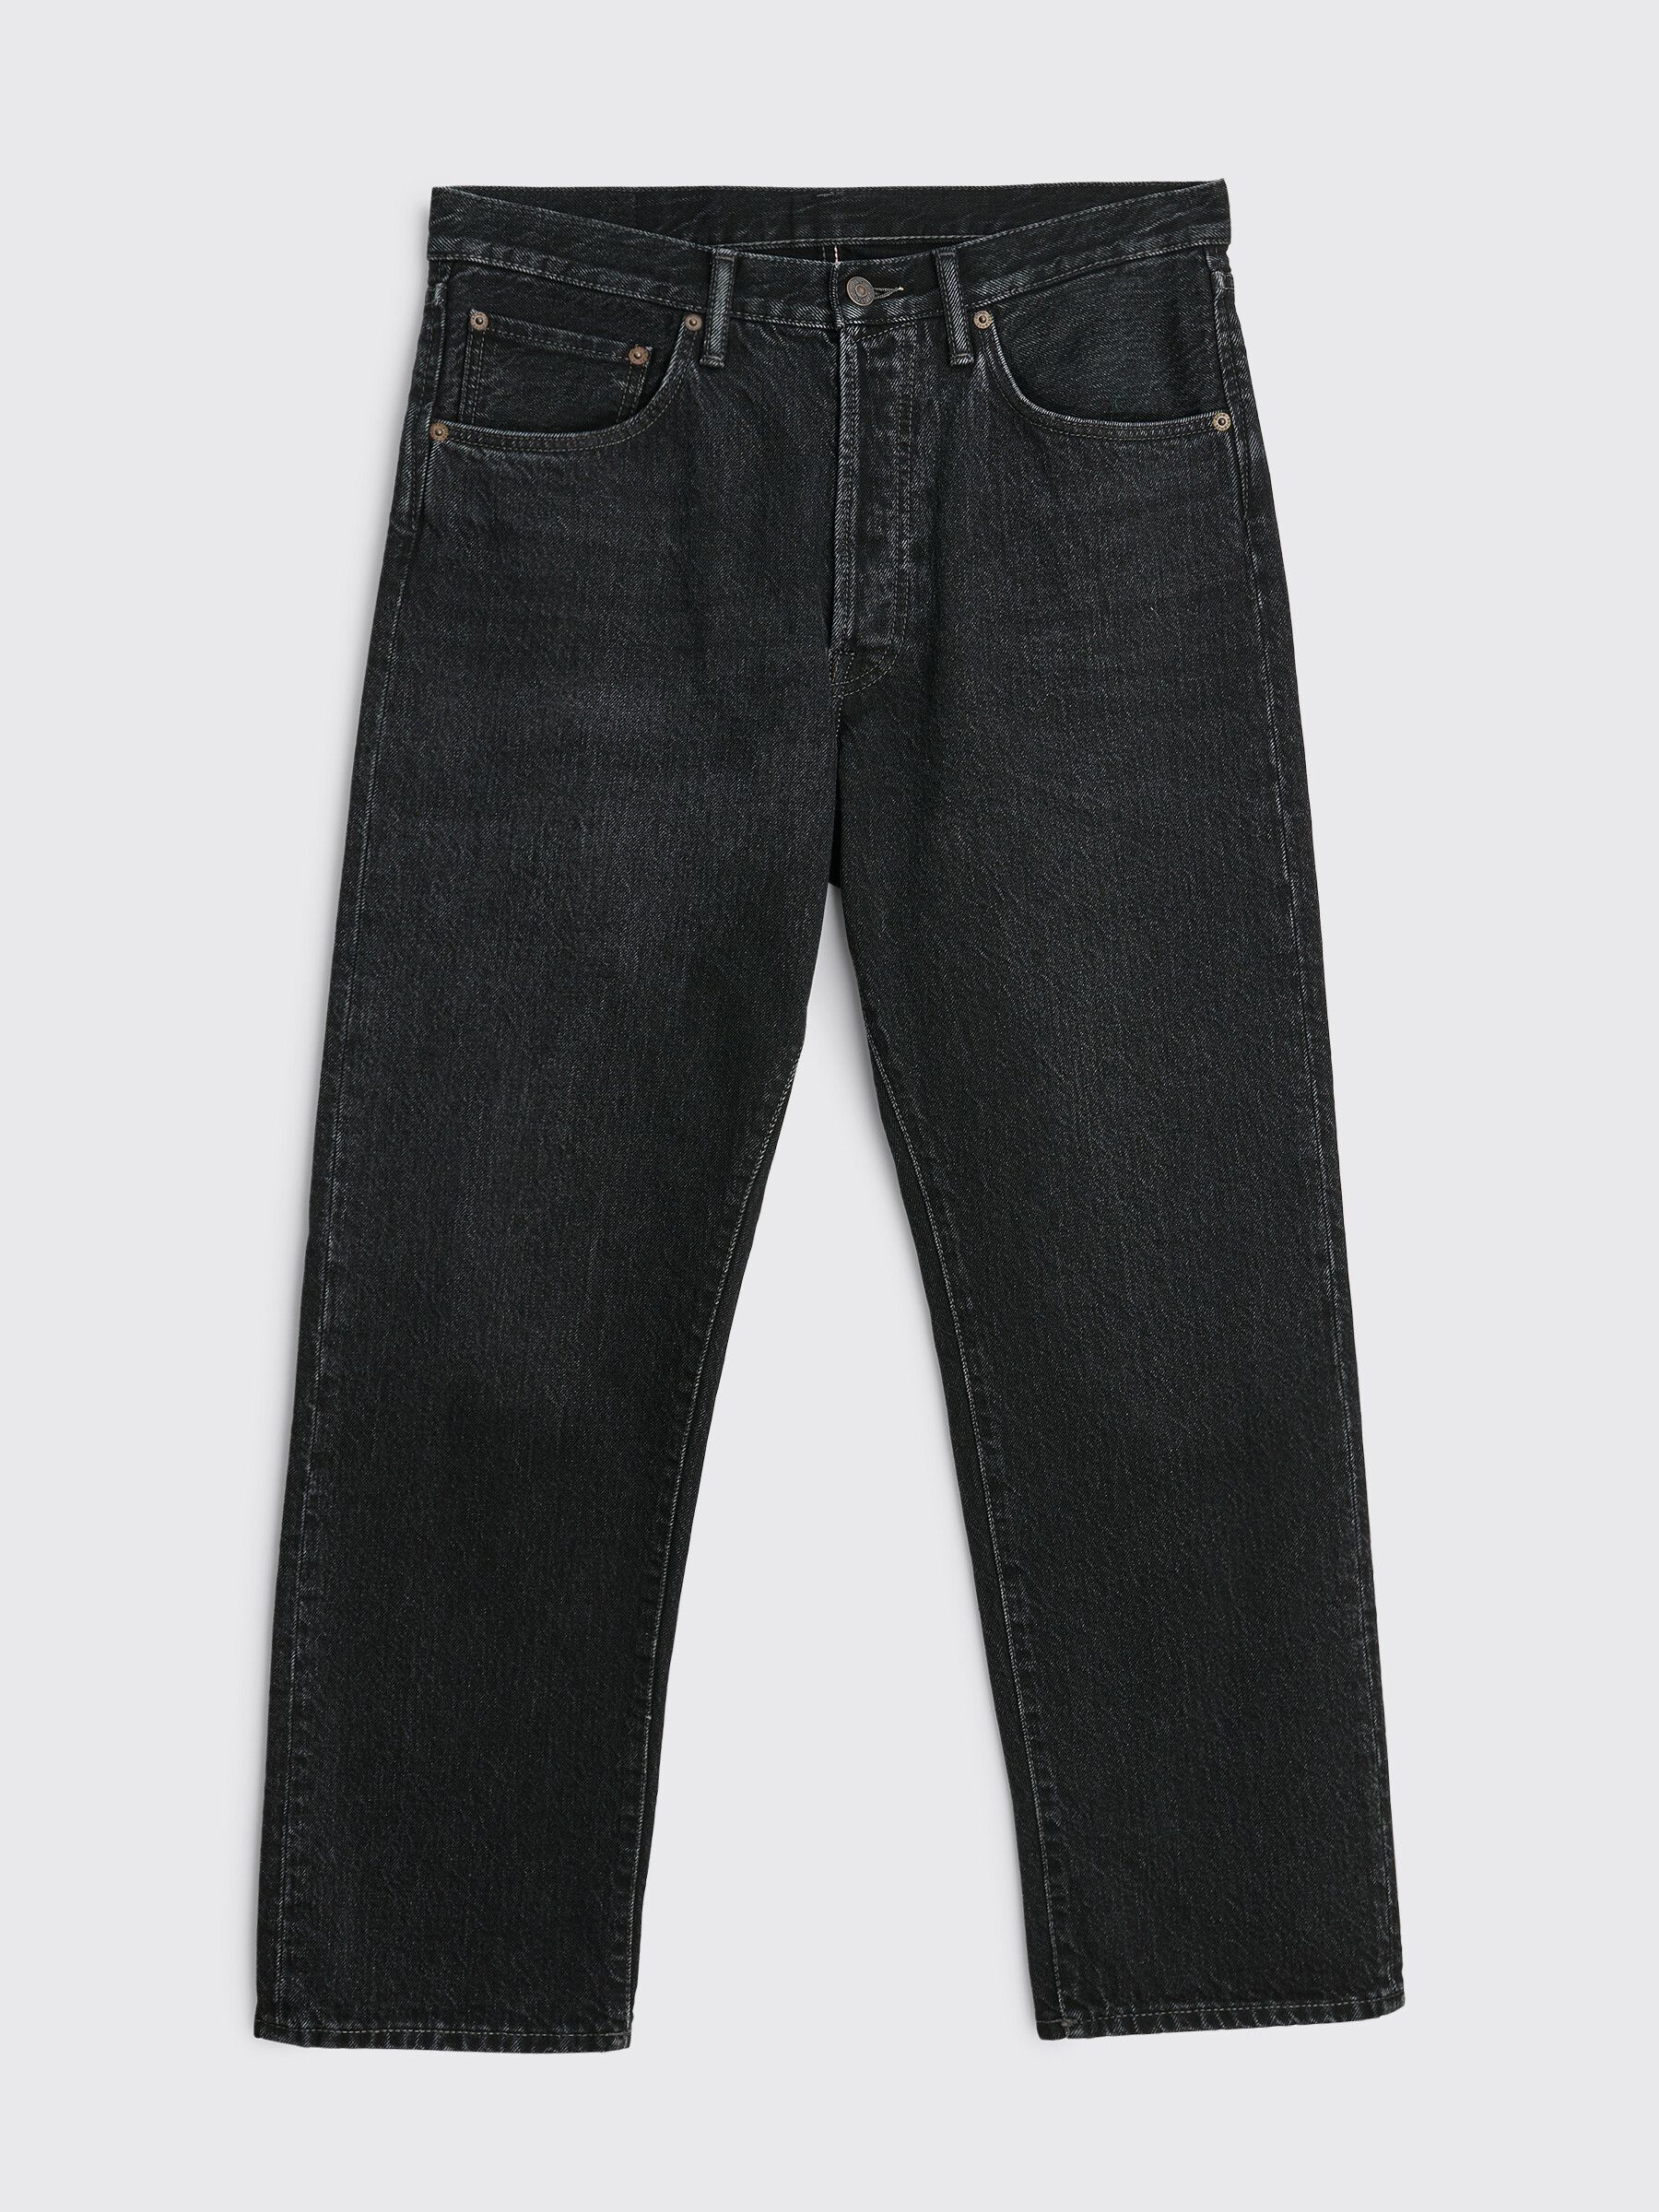 Acne Studios 2003 Relaxed Fit Jeans | Grailed